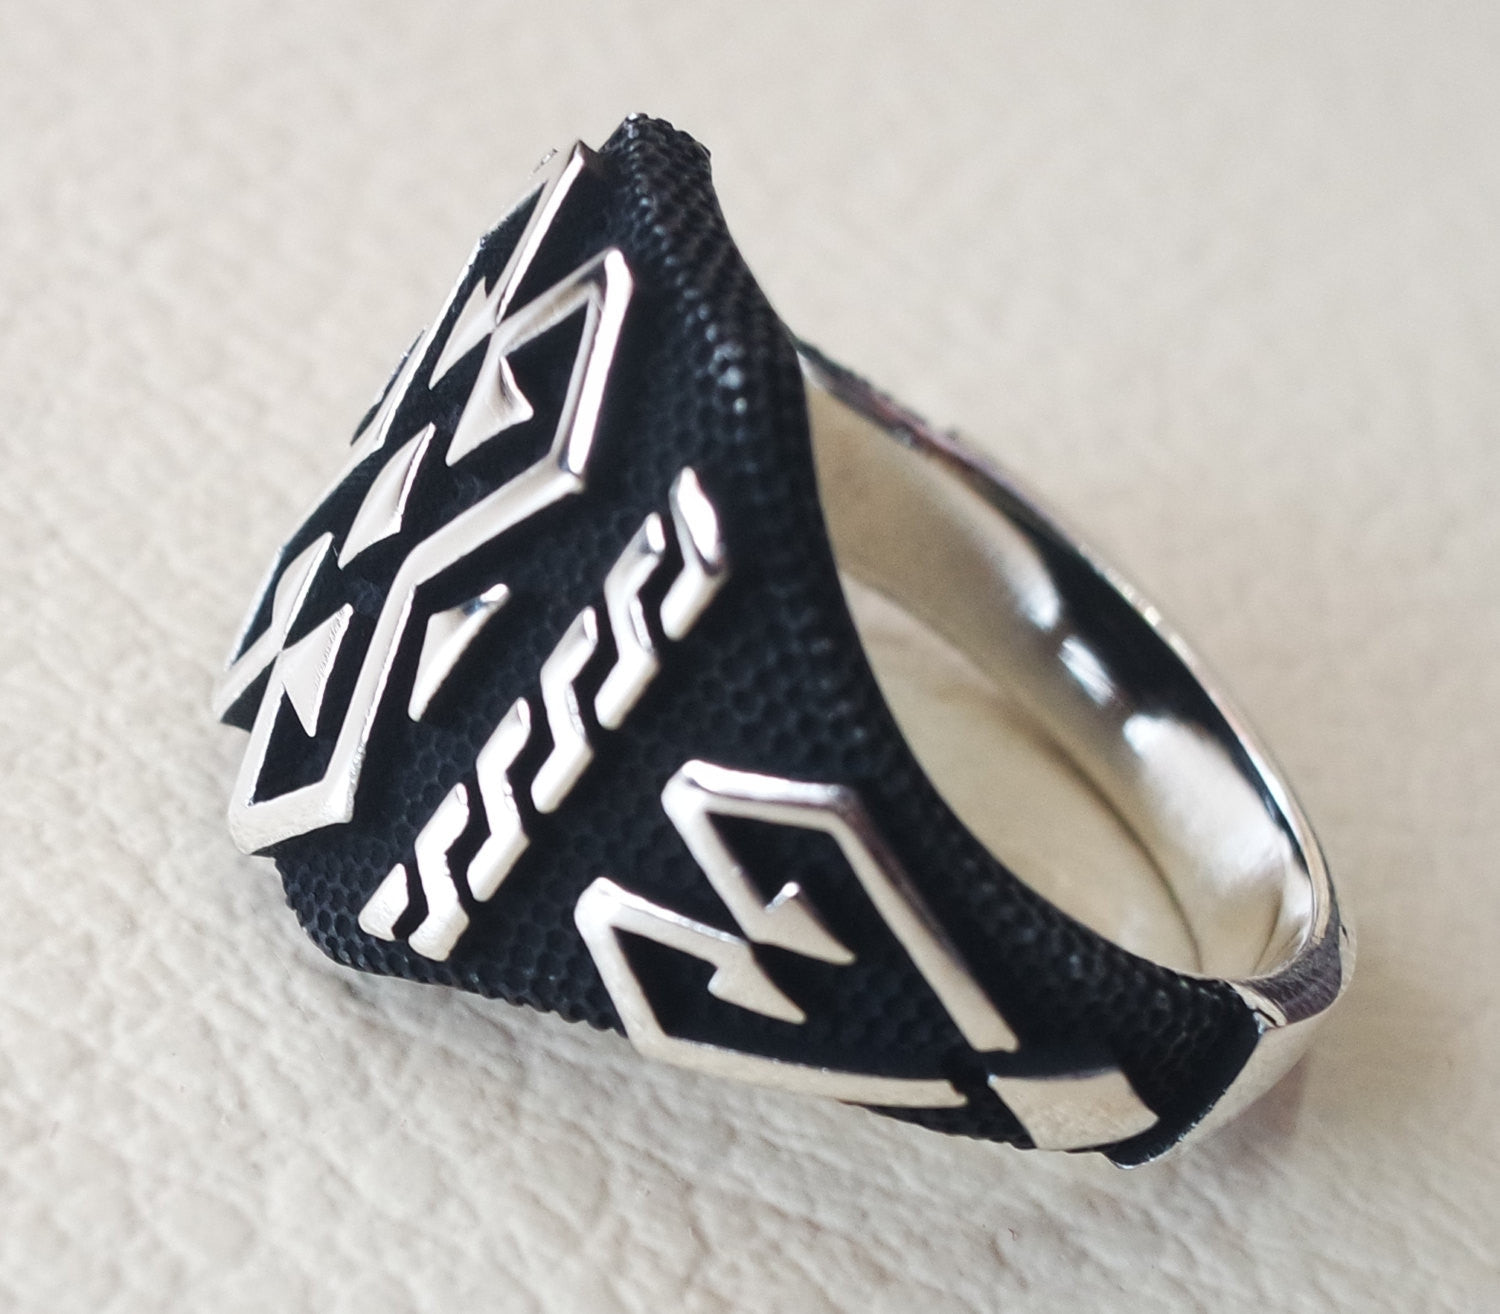 man ring celtic sterling silver 925 heavy rectangular shape any size antique style high quality jewelry